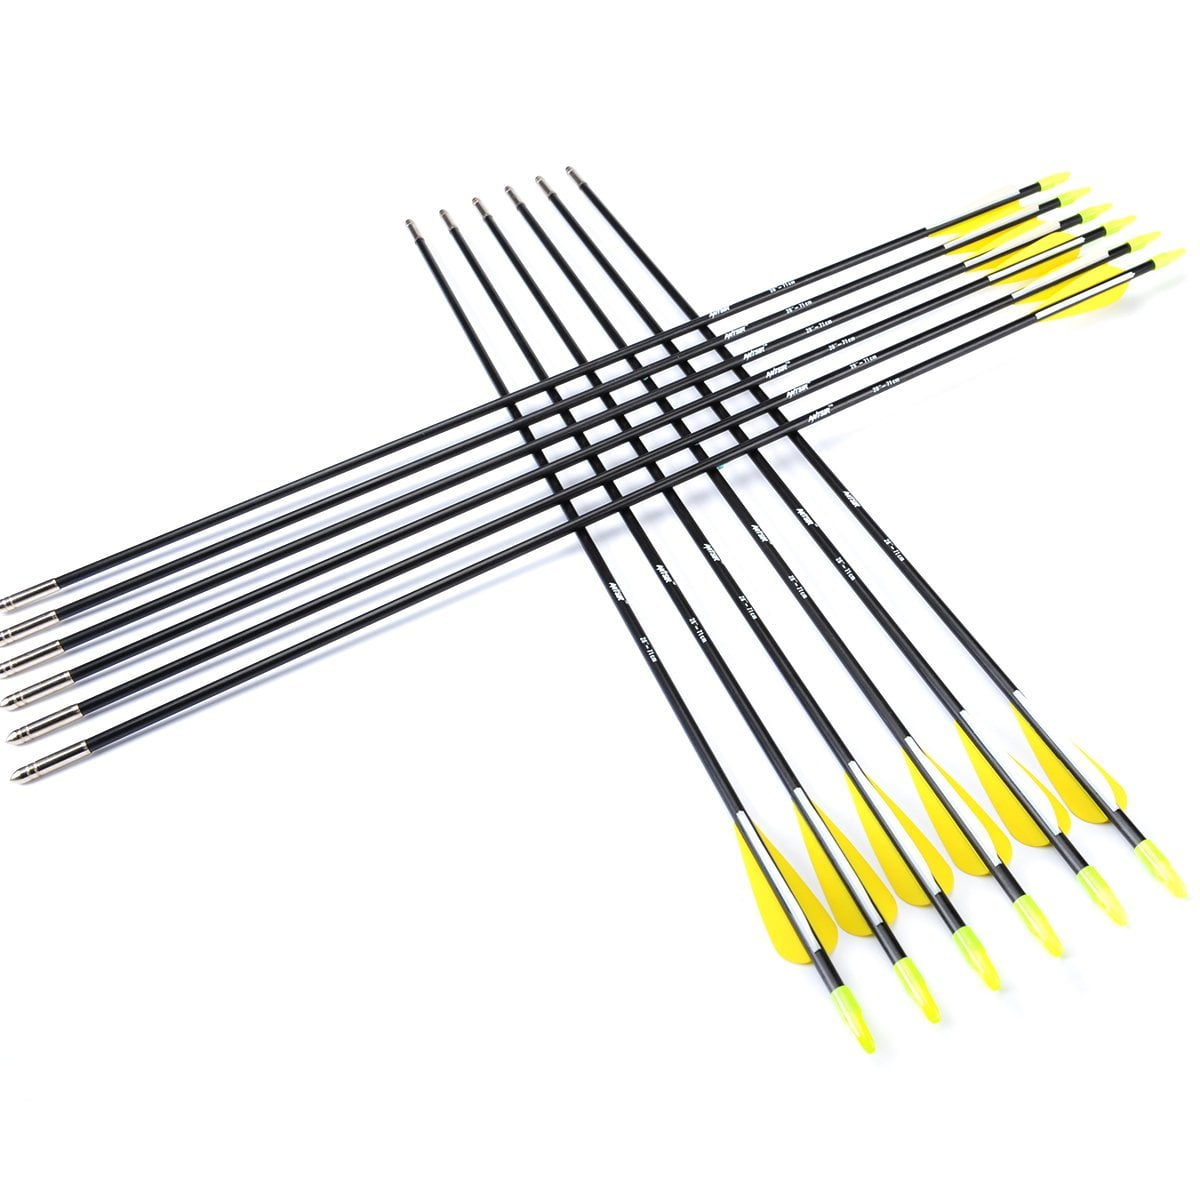 28 Mixed Carbon Target&Hunting Practice Archery Arrows with Adjustable Nock Aluminum Seat for Compound&Recuve Bow Pack of 12 